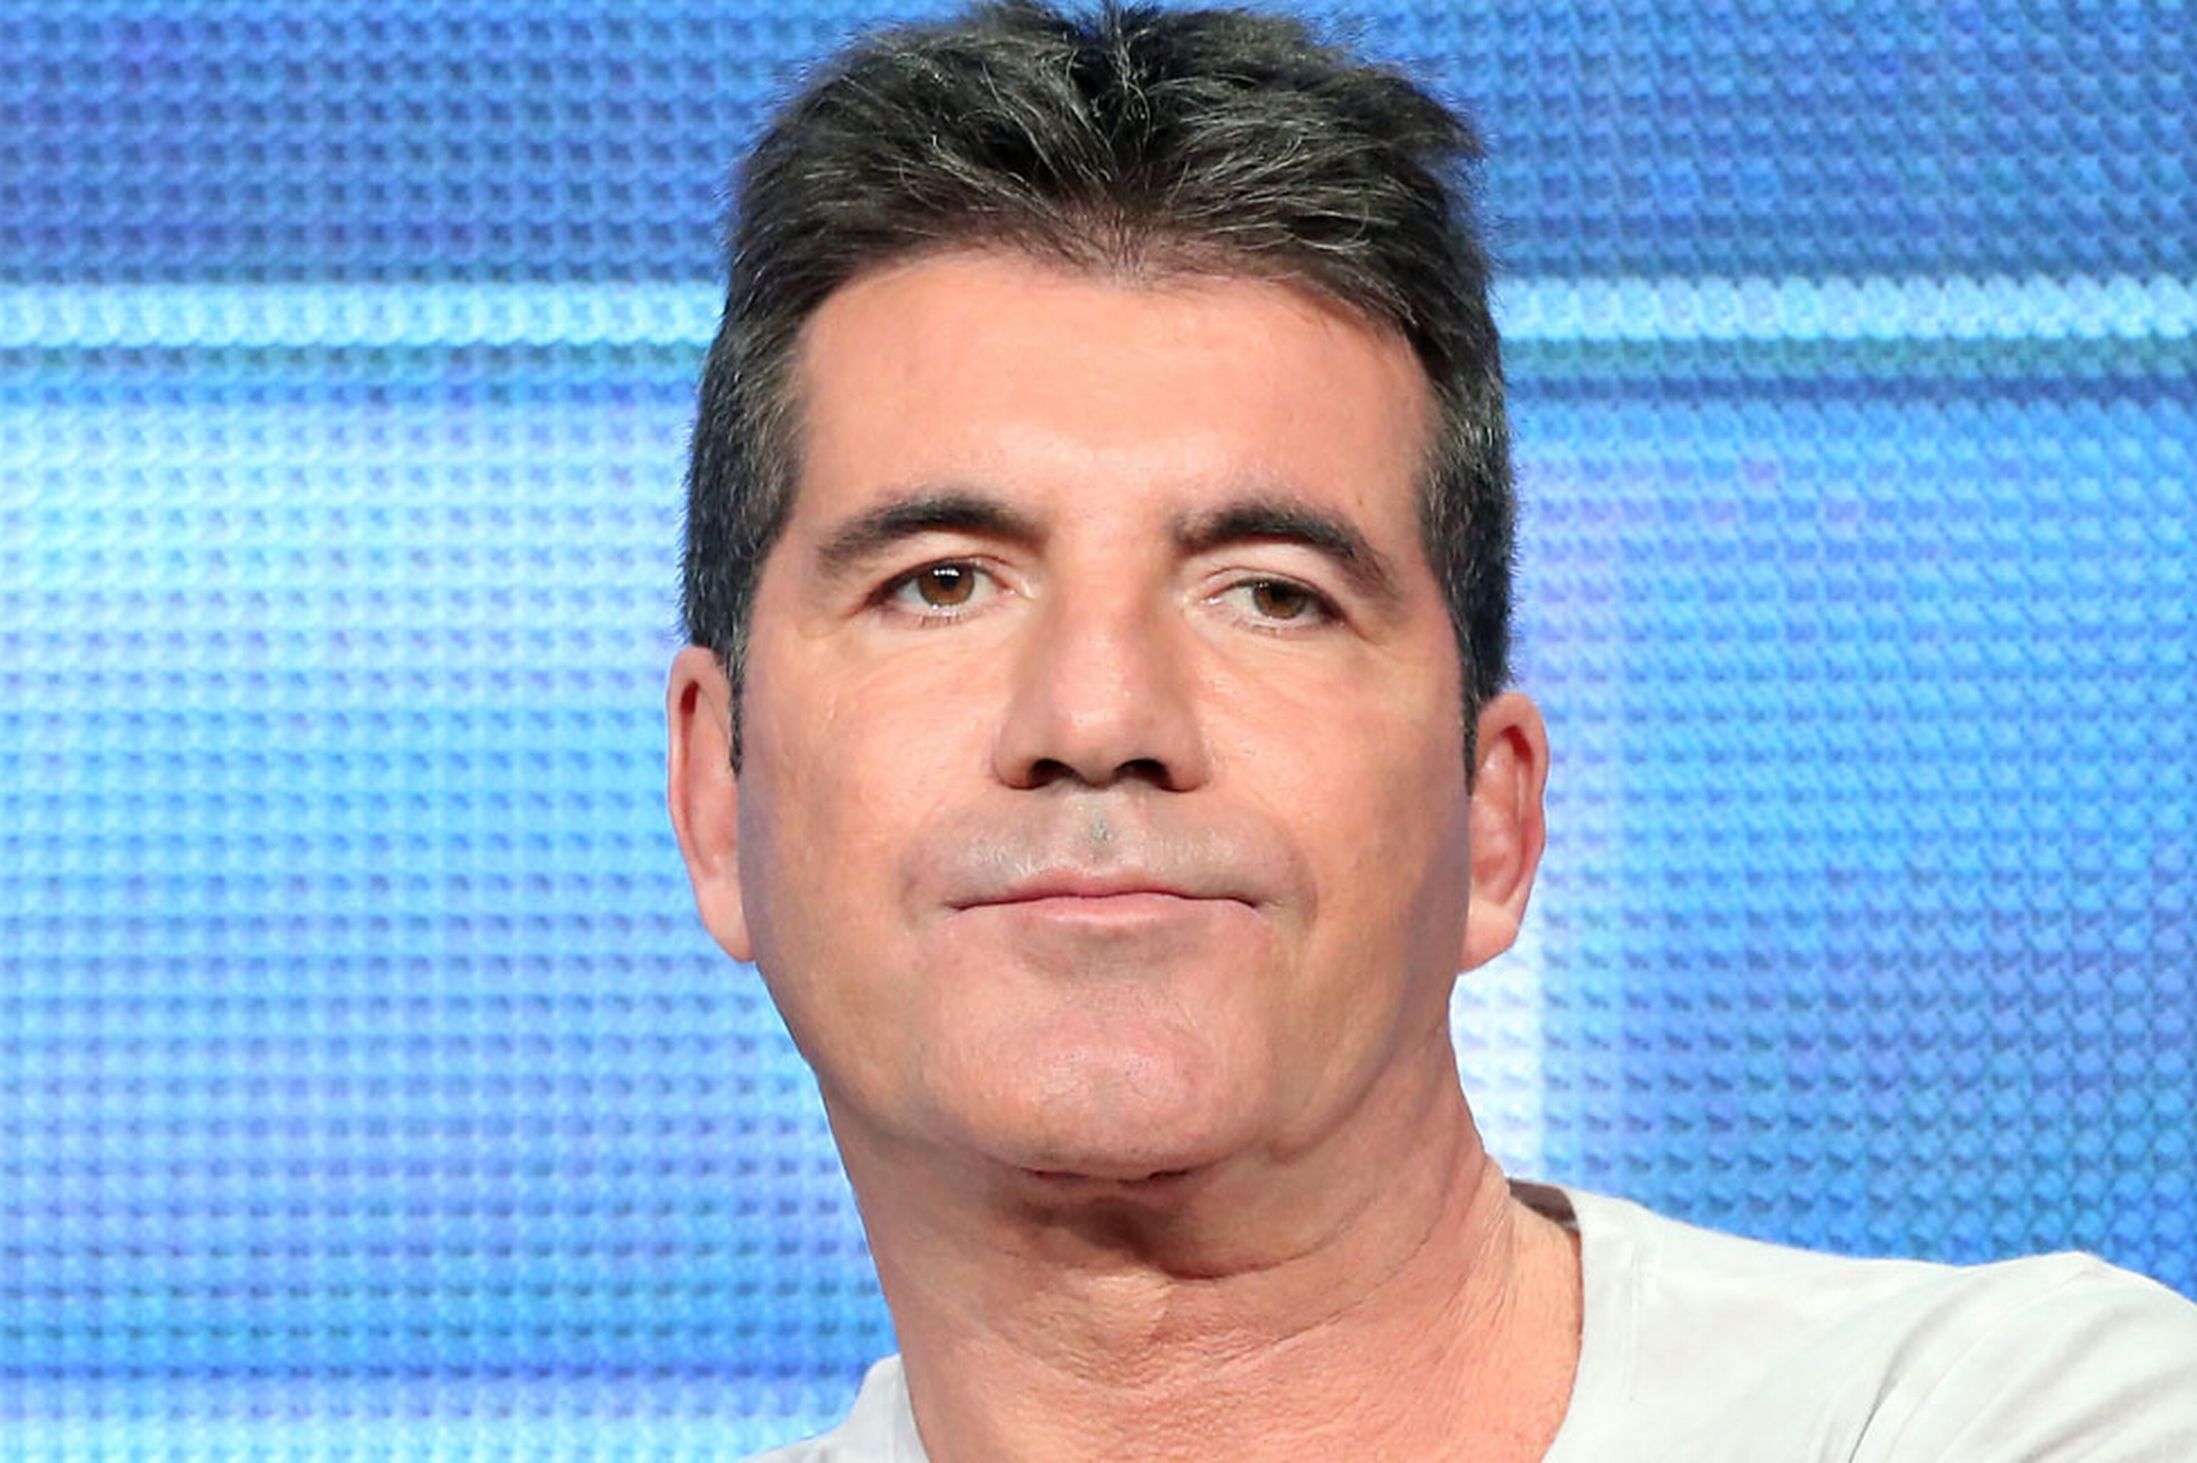 Simon Cowell's 'Ultimate DJ' Show Gets Axed By Yahoo.